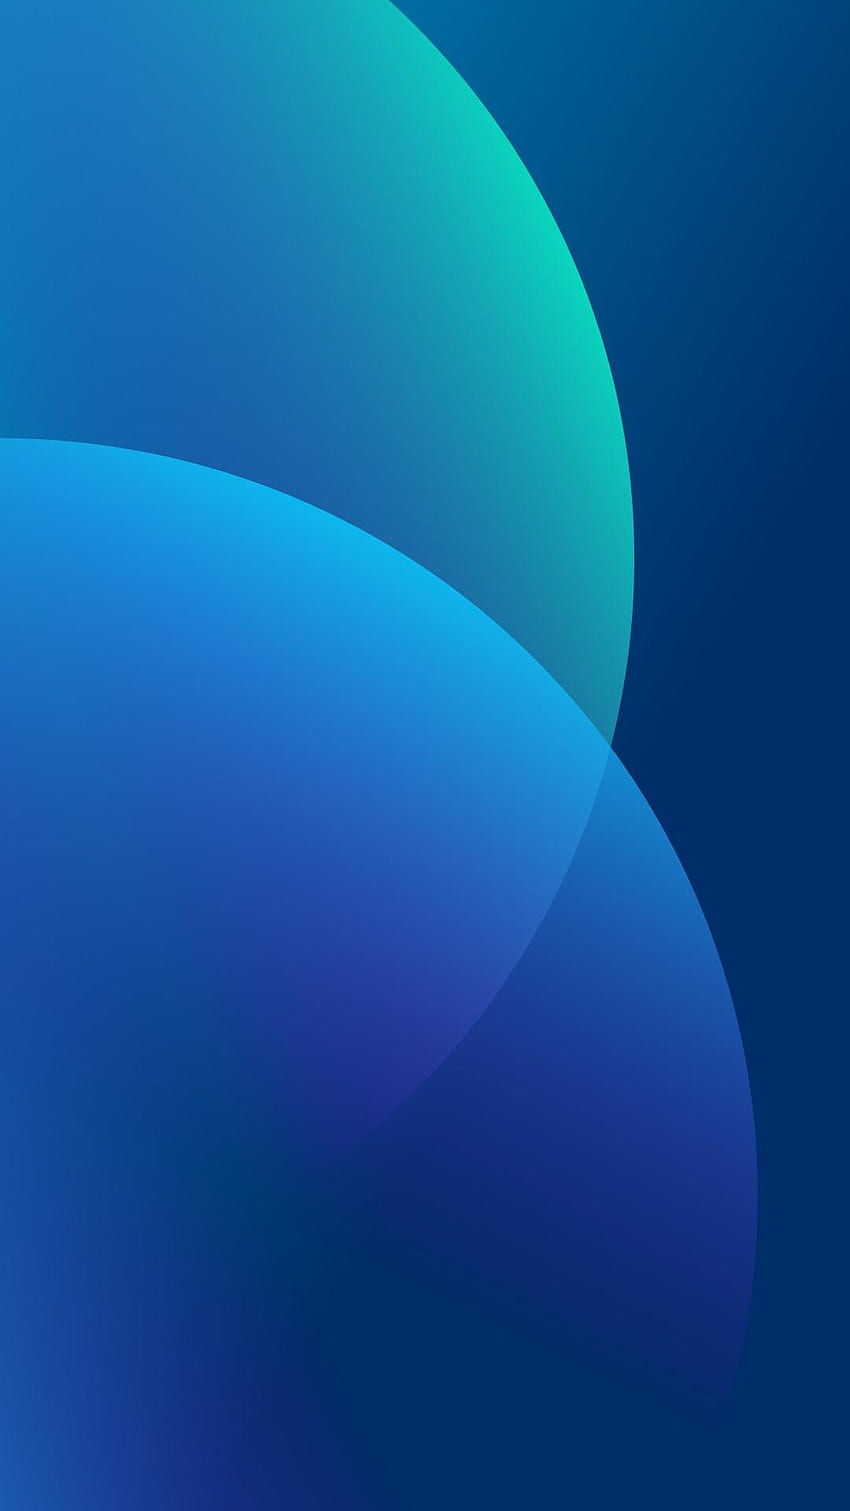 Download the Oppo Find X stock wallpaper